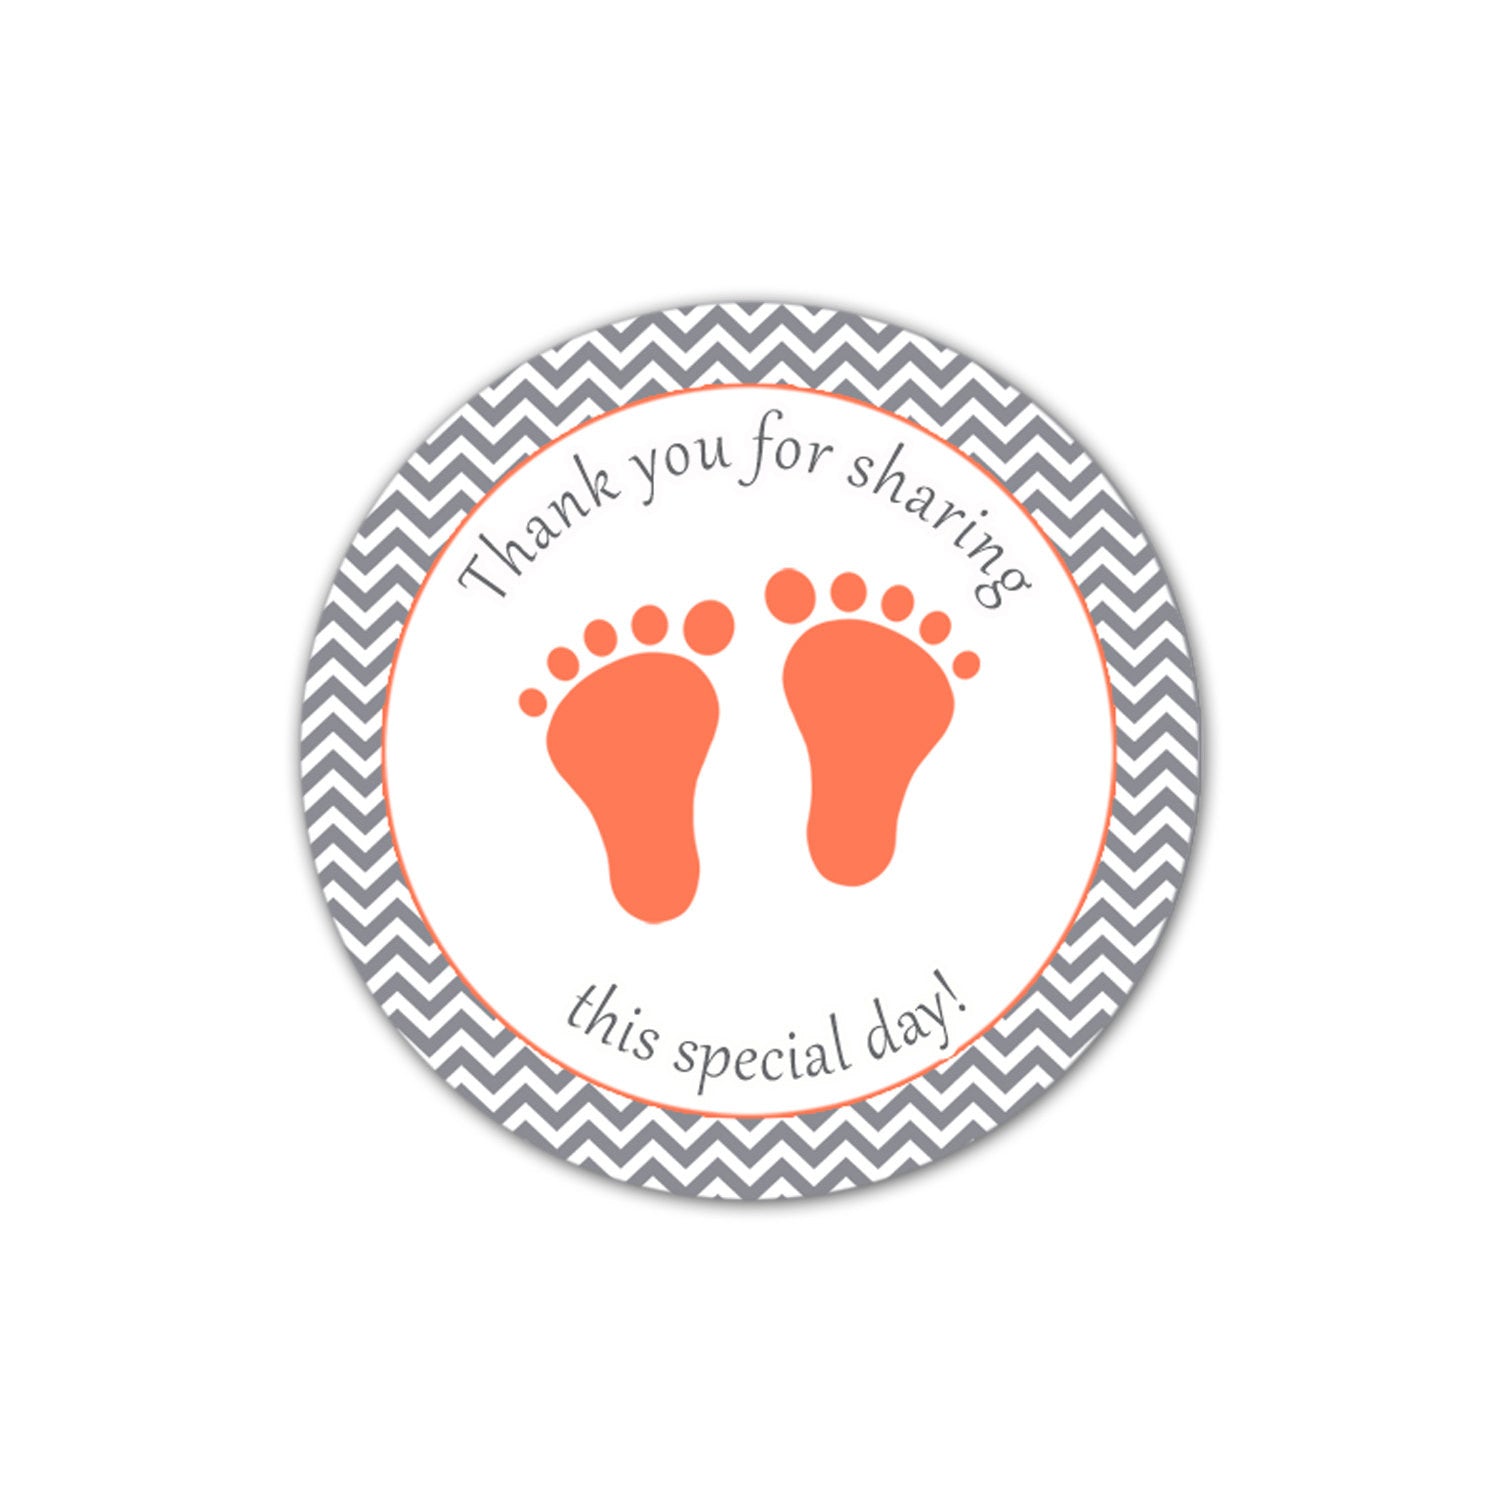 INSTANT DOWNLOAD Coral Grey Chevron Baby Shower Party Thank You Tags Label - Baby Feet Party Favors Baby Shower Favors Baby Shower Items